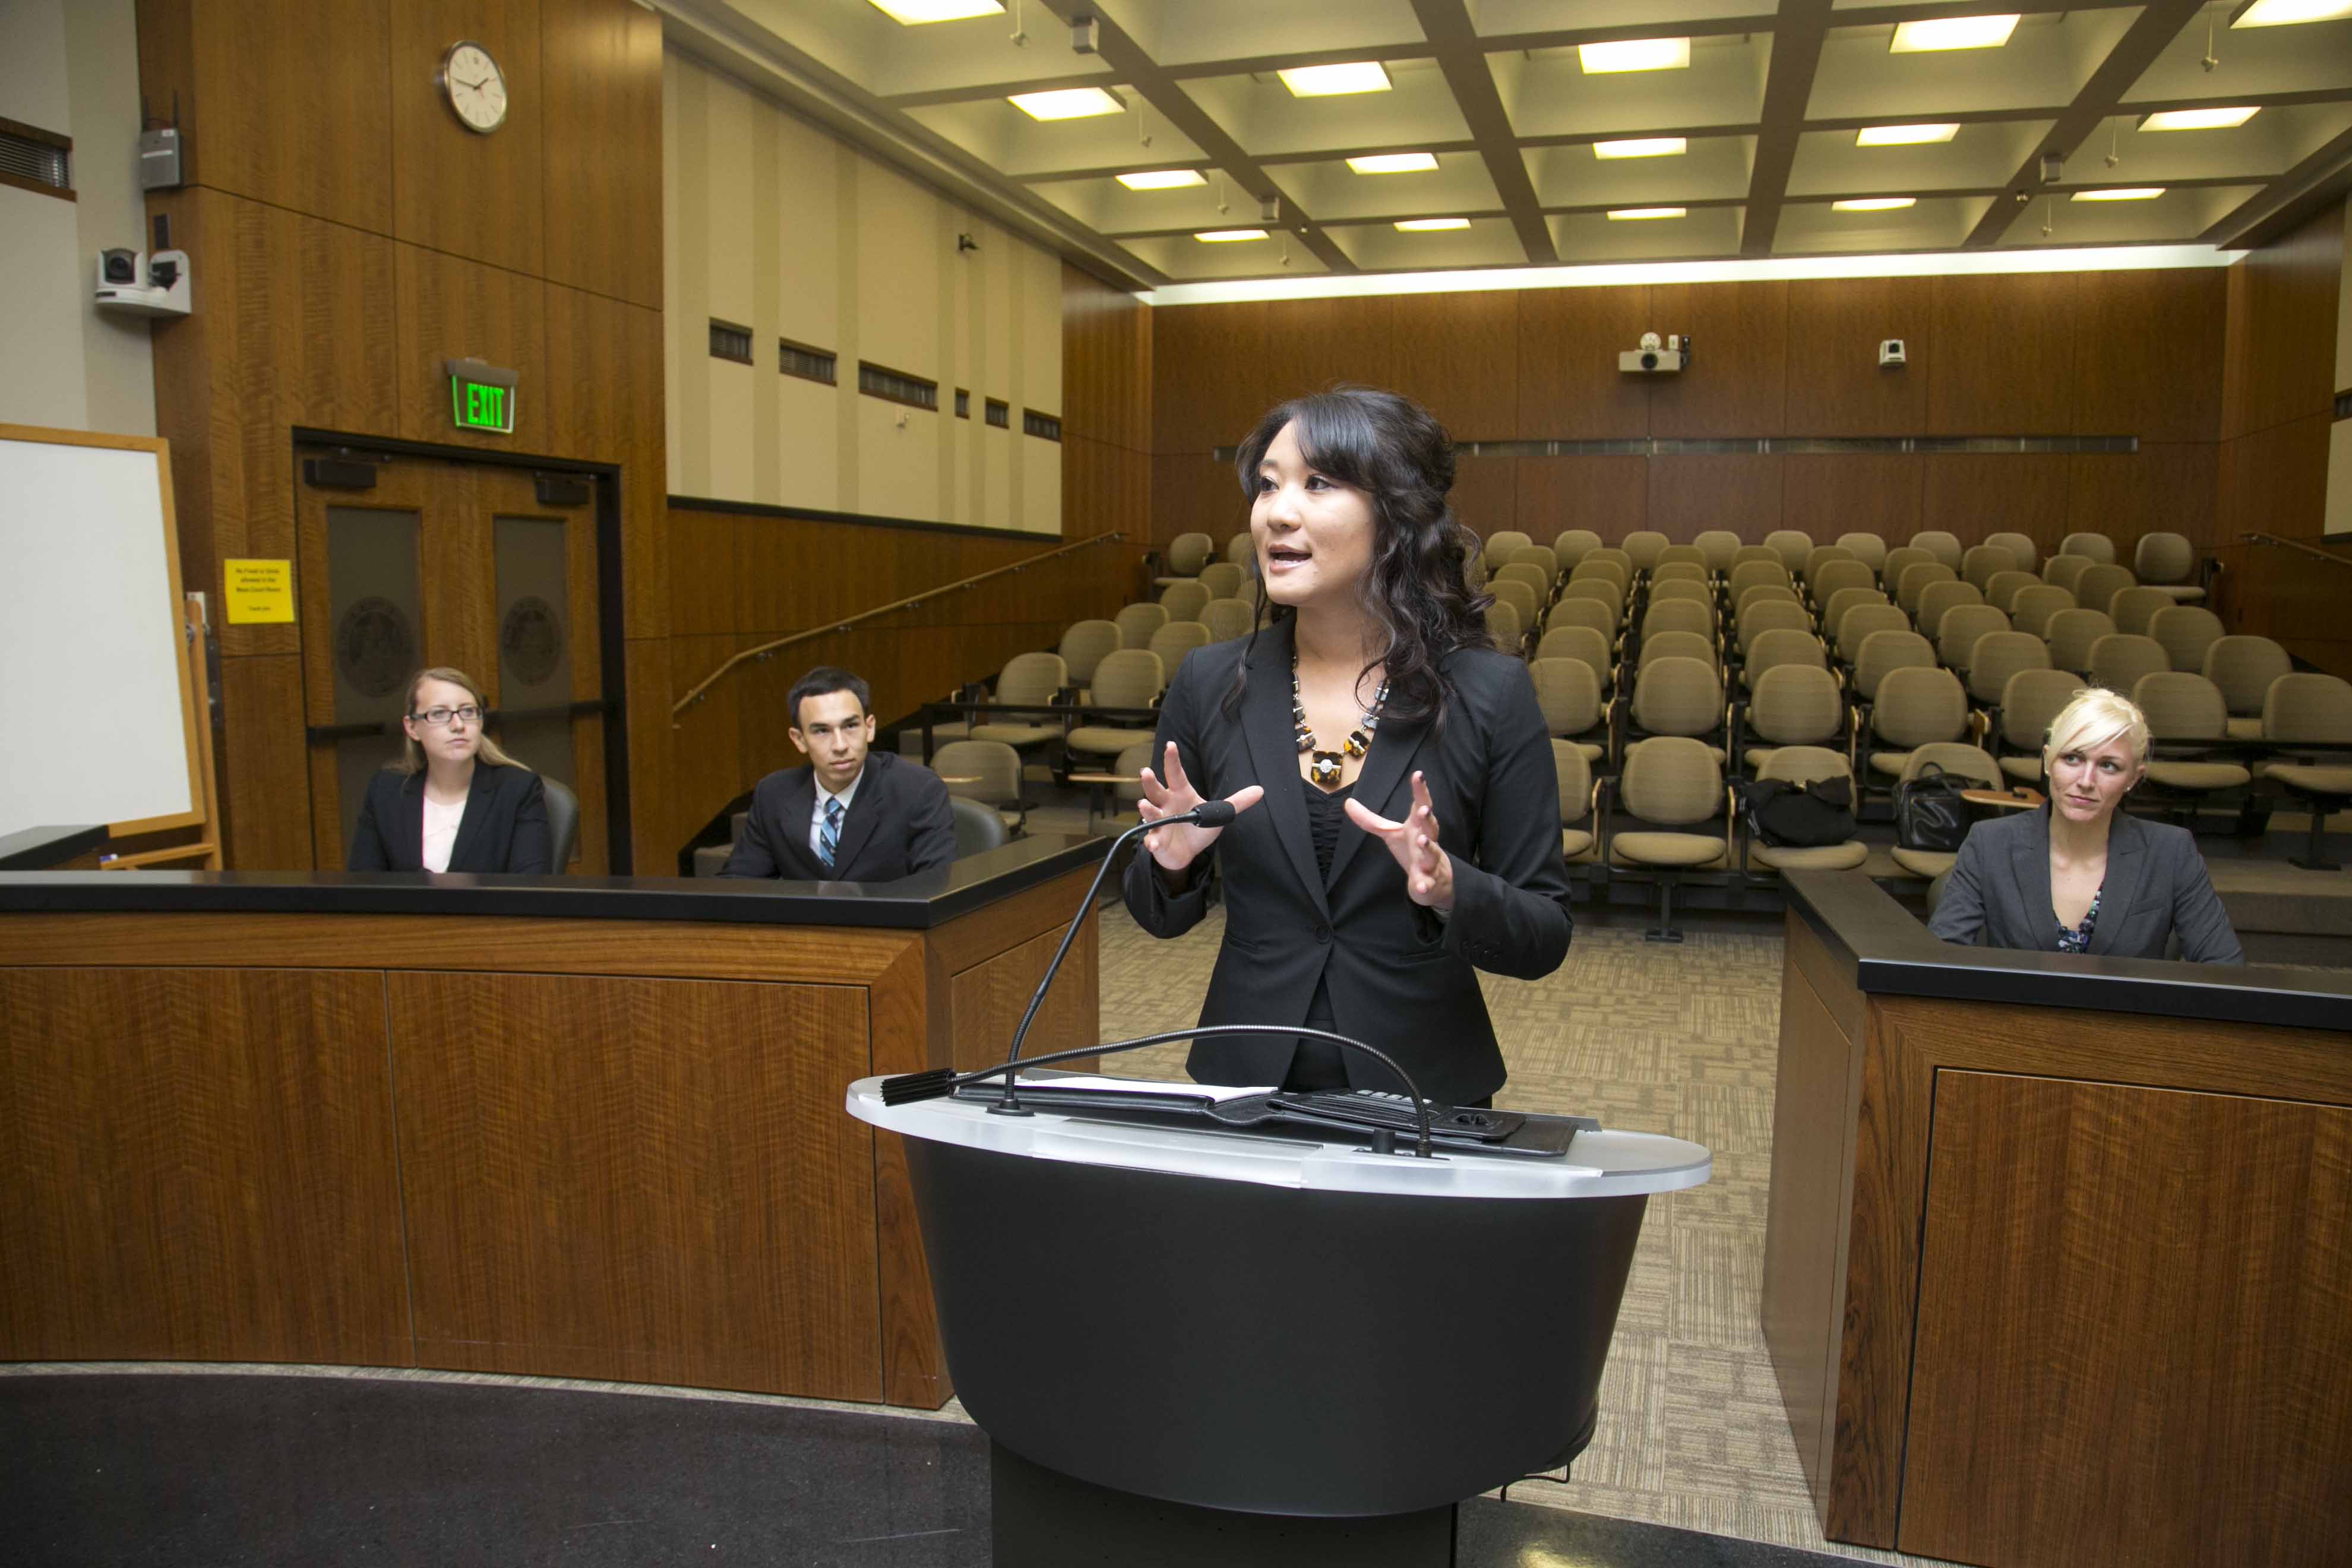 A student speaking in moot court, three individuals are sitting behind her